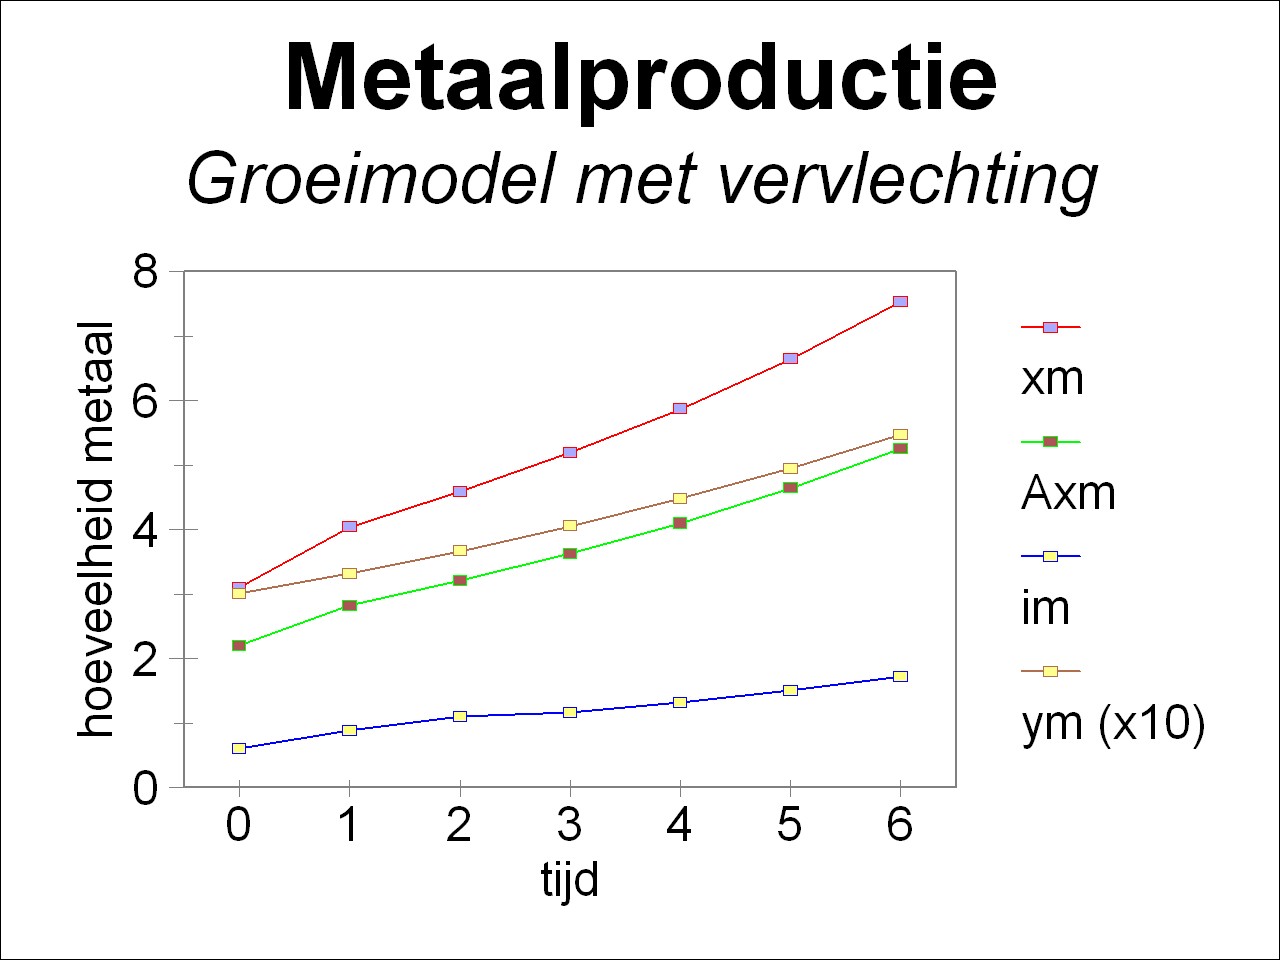 Picture of growth curves for metal